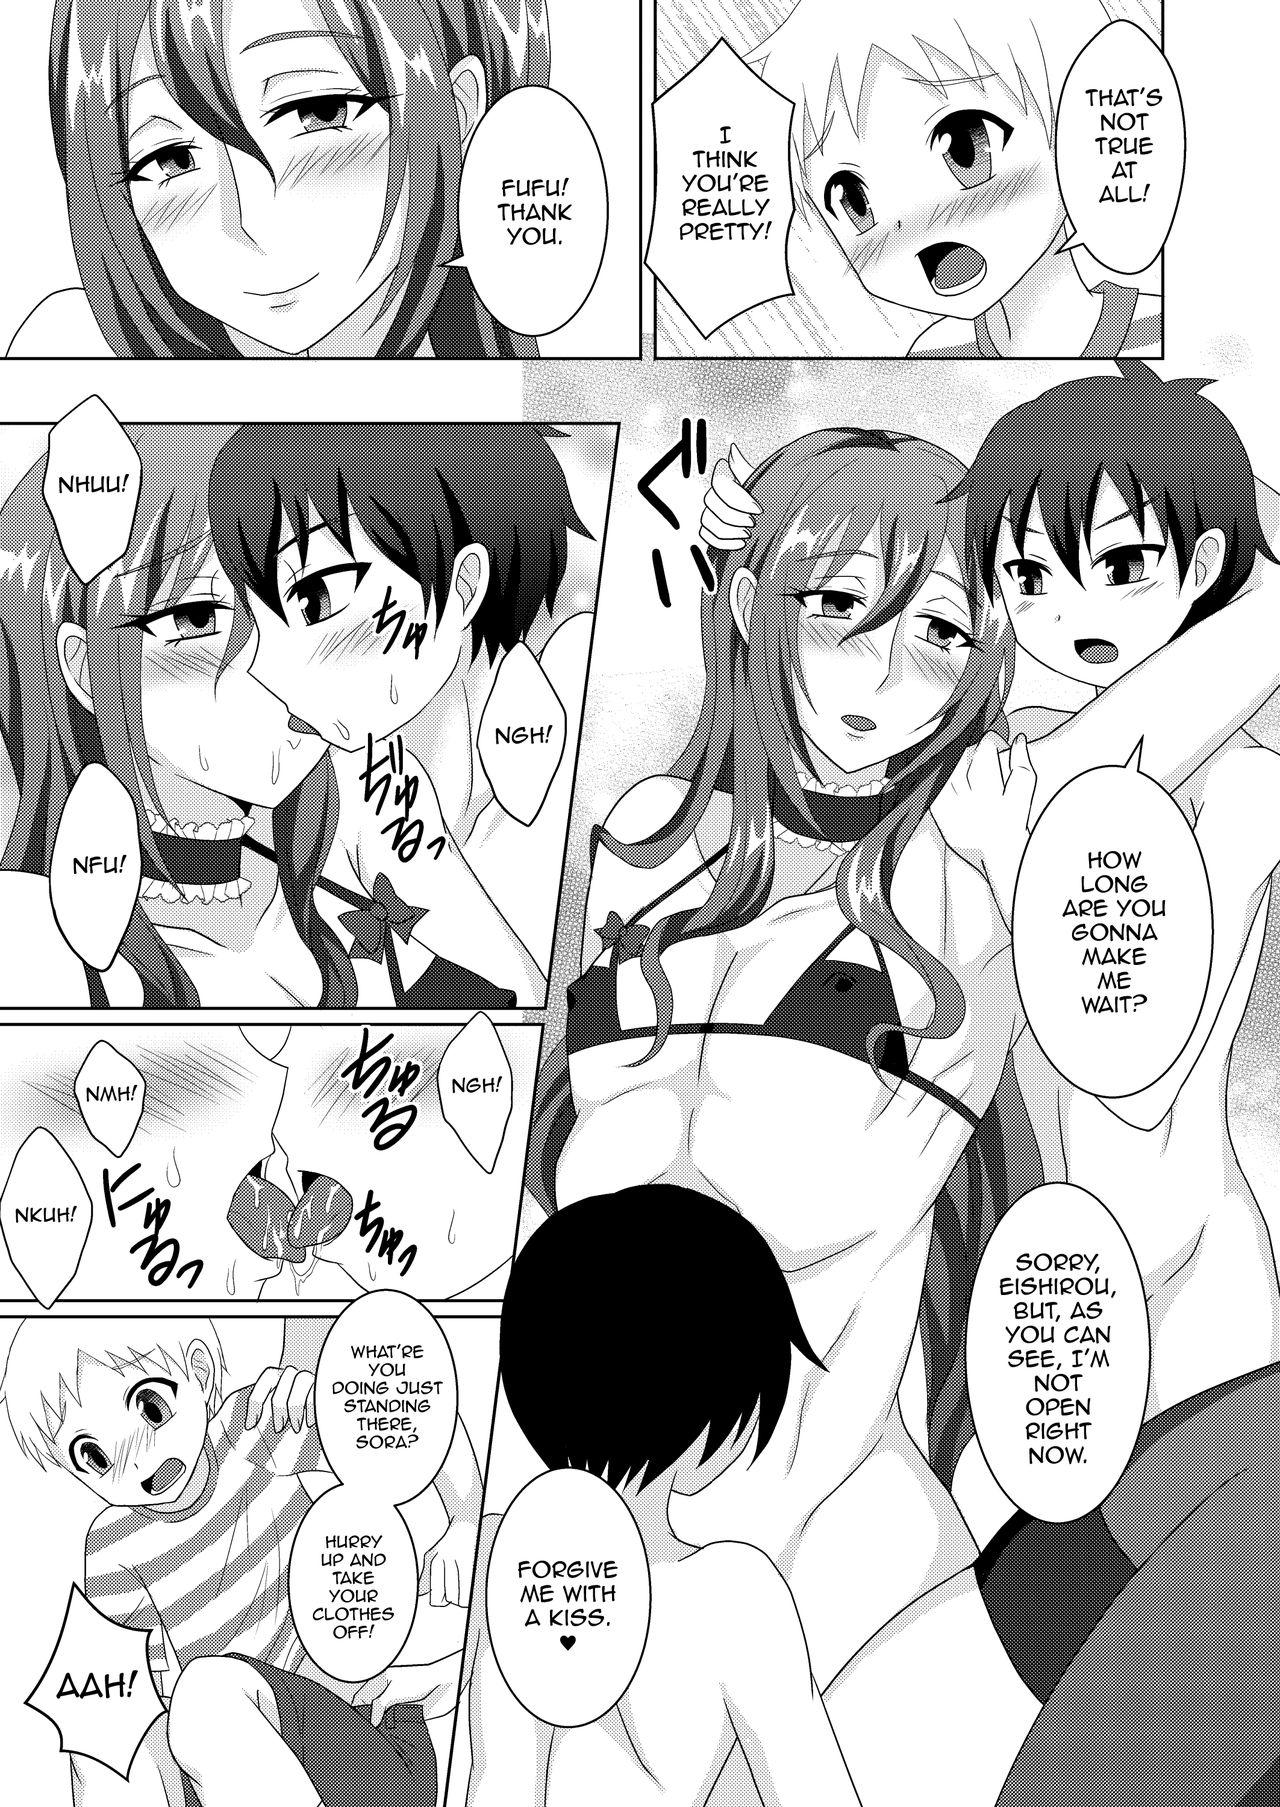 Fat Pussy Houkago Onee-chan Club - Original Mouth - Page 8